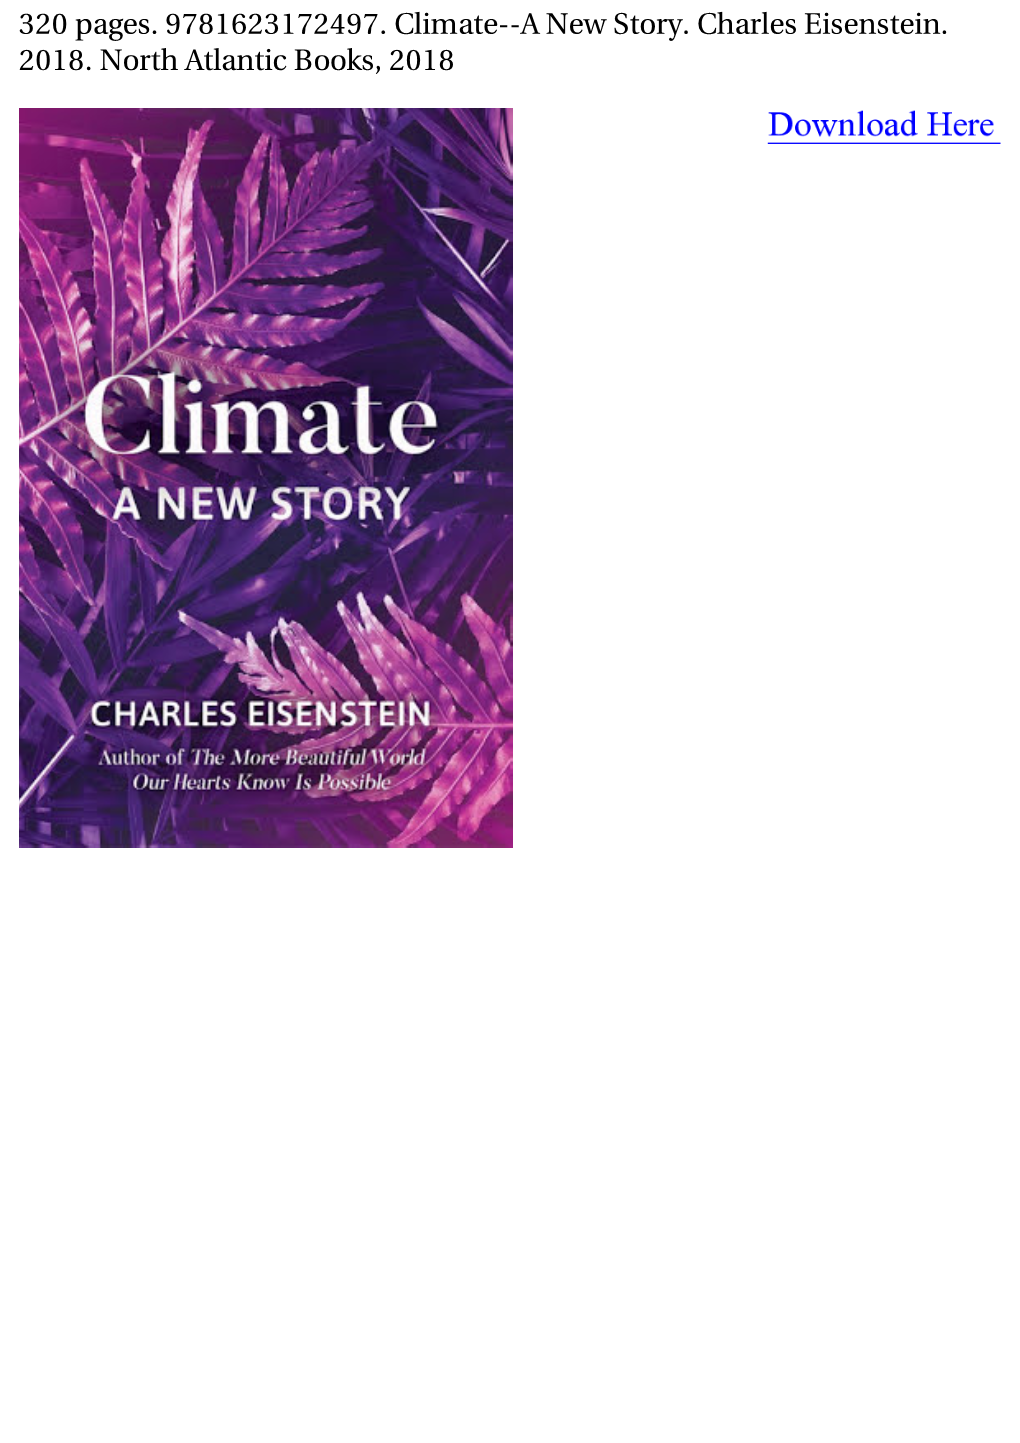 320 Pages. 9781623172497. Climate--A New Story. Charles Eisenstein. 2018. North Atlantic Books, 2018